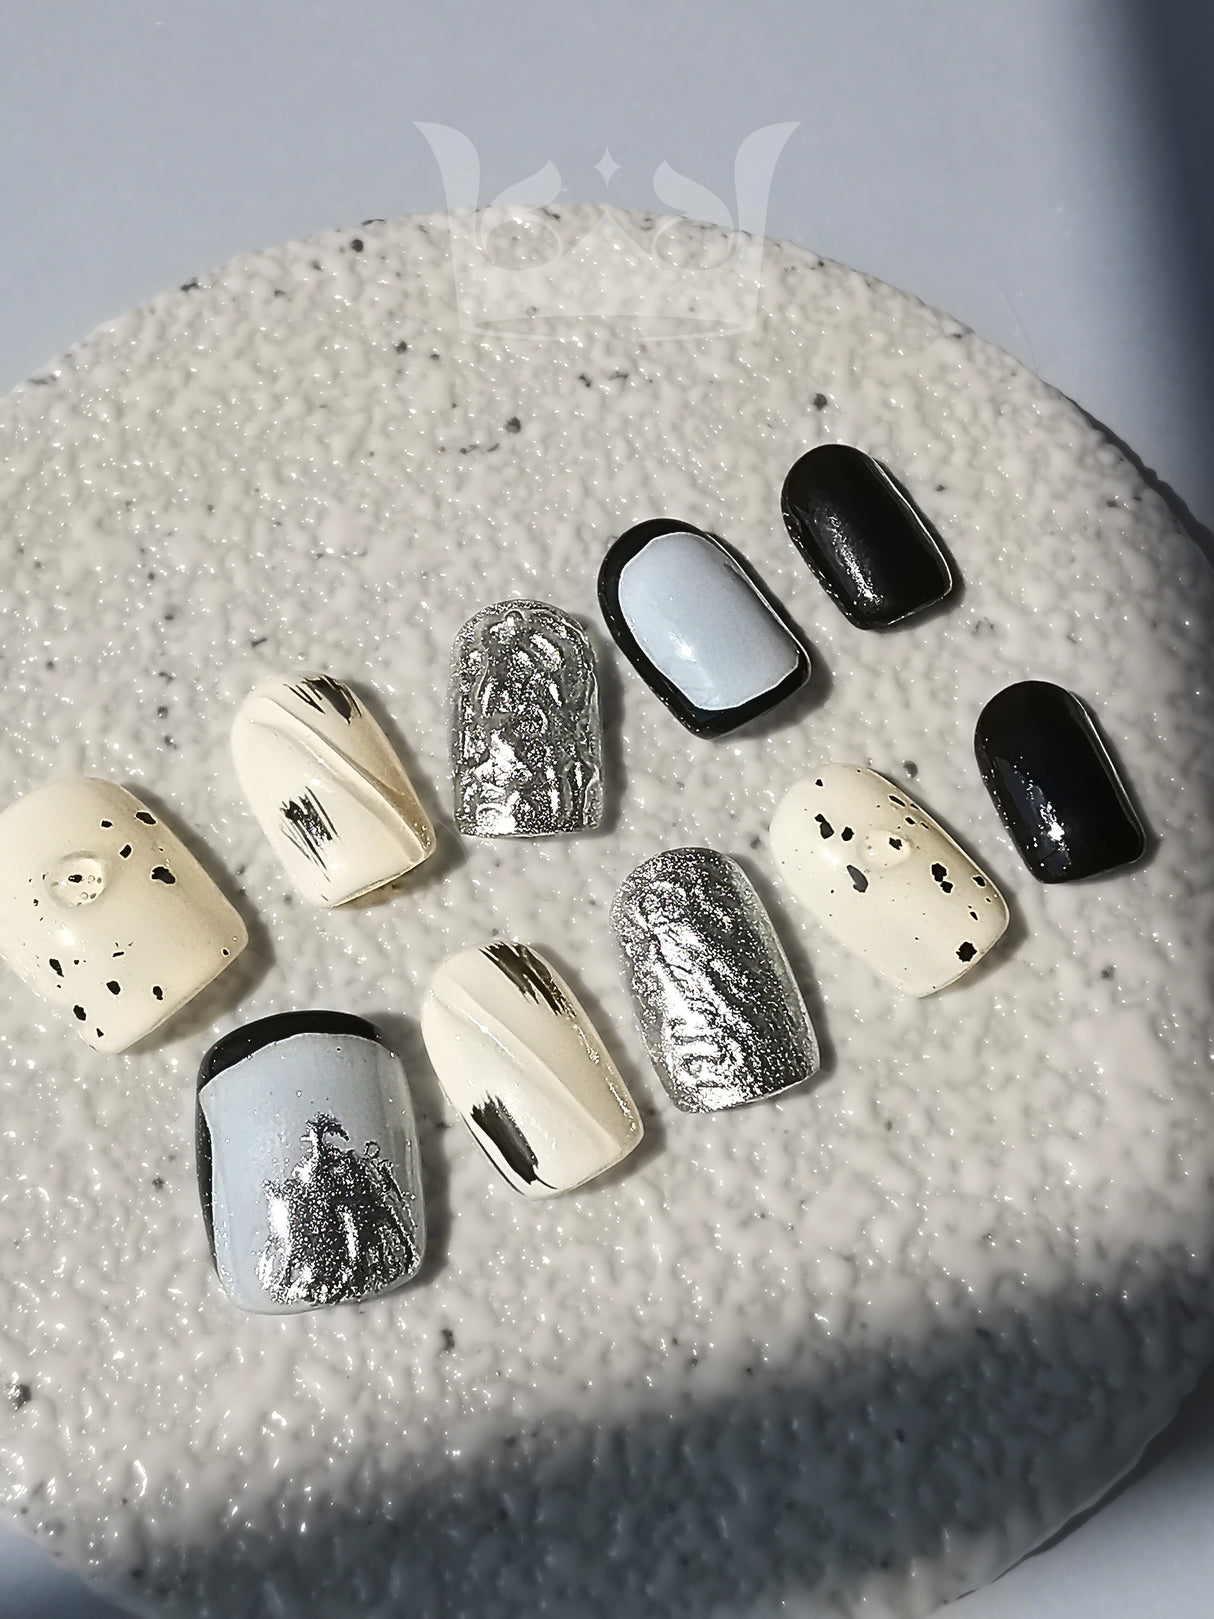 These press-on nails are  for cute purposes, such as for a special occasion or personal expression. They feature a mix of design elements for a modern and artistic look.